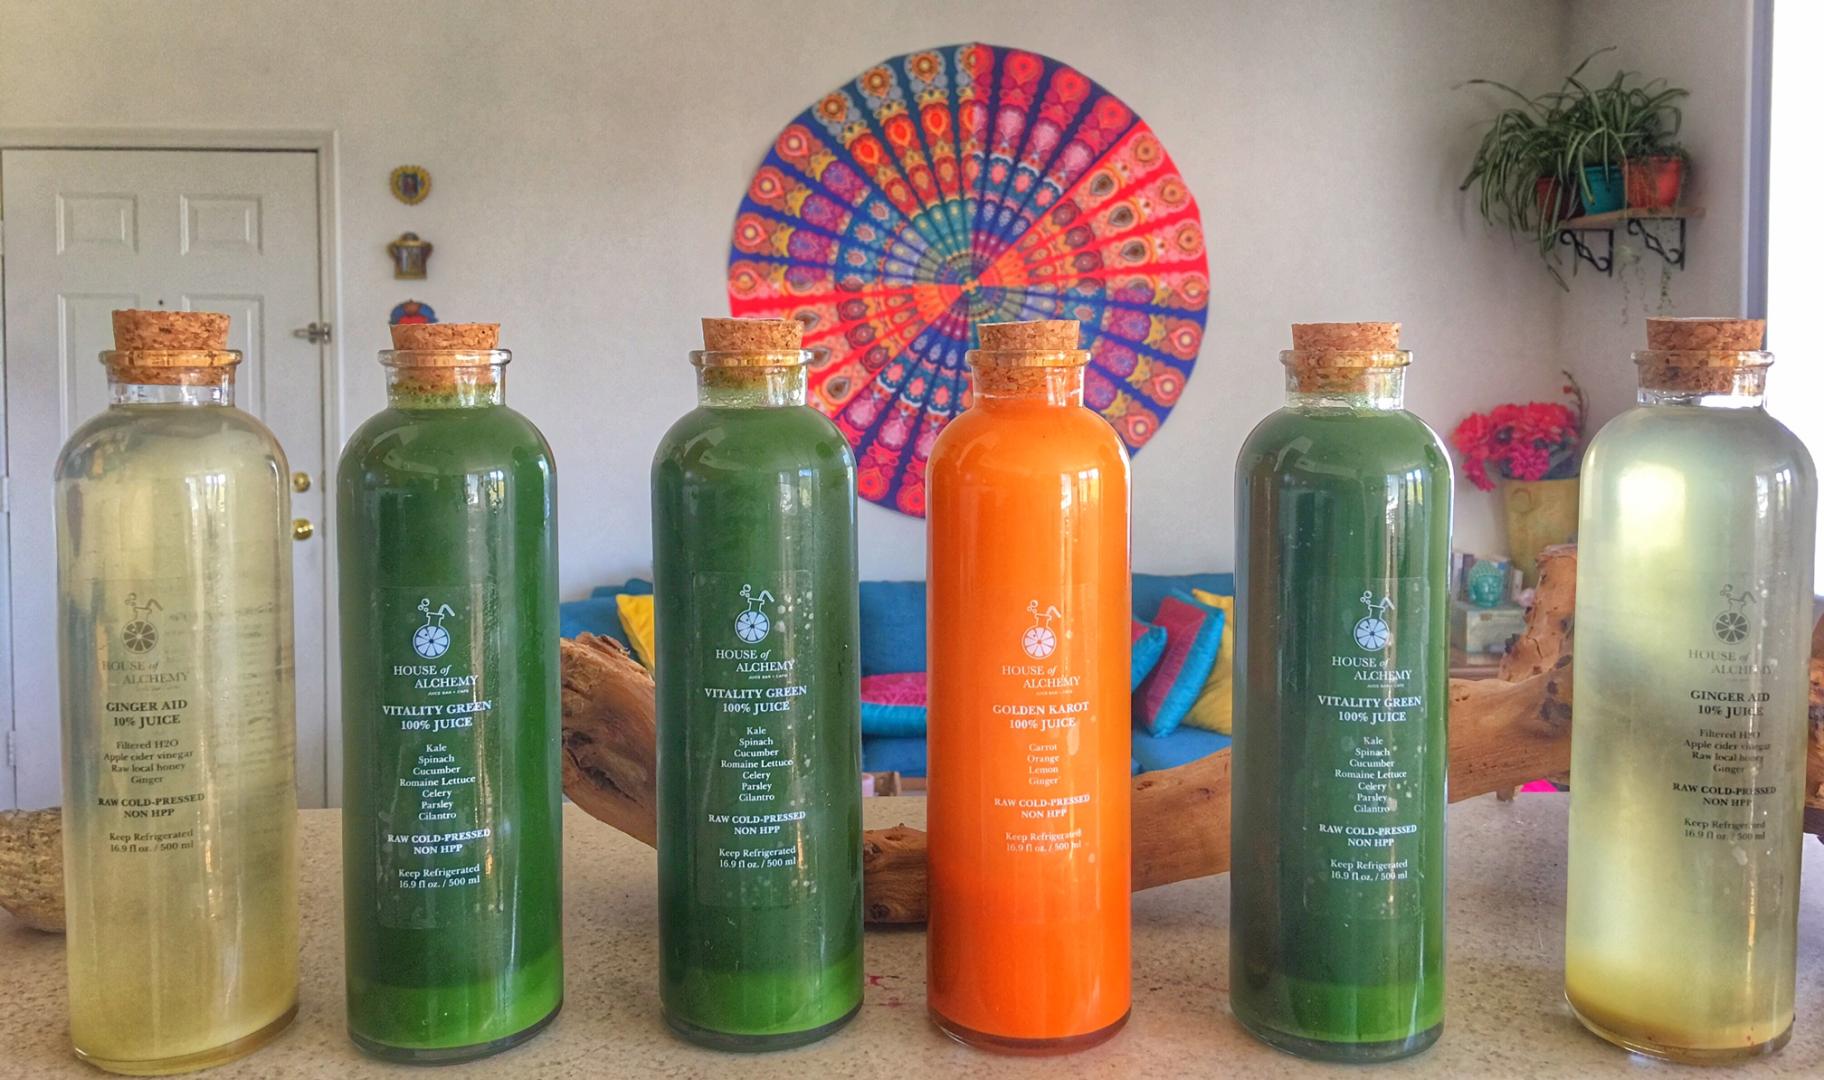 A look at a two week juice cleanse and what happens when you go on a juice cleanse. Juice cleanse by House of Alchemy Las Vegas. 